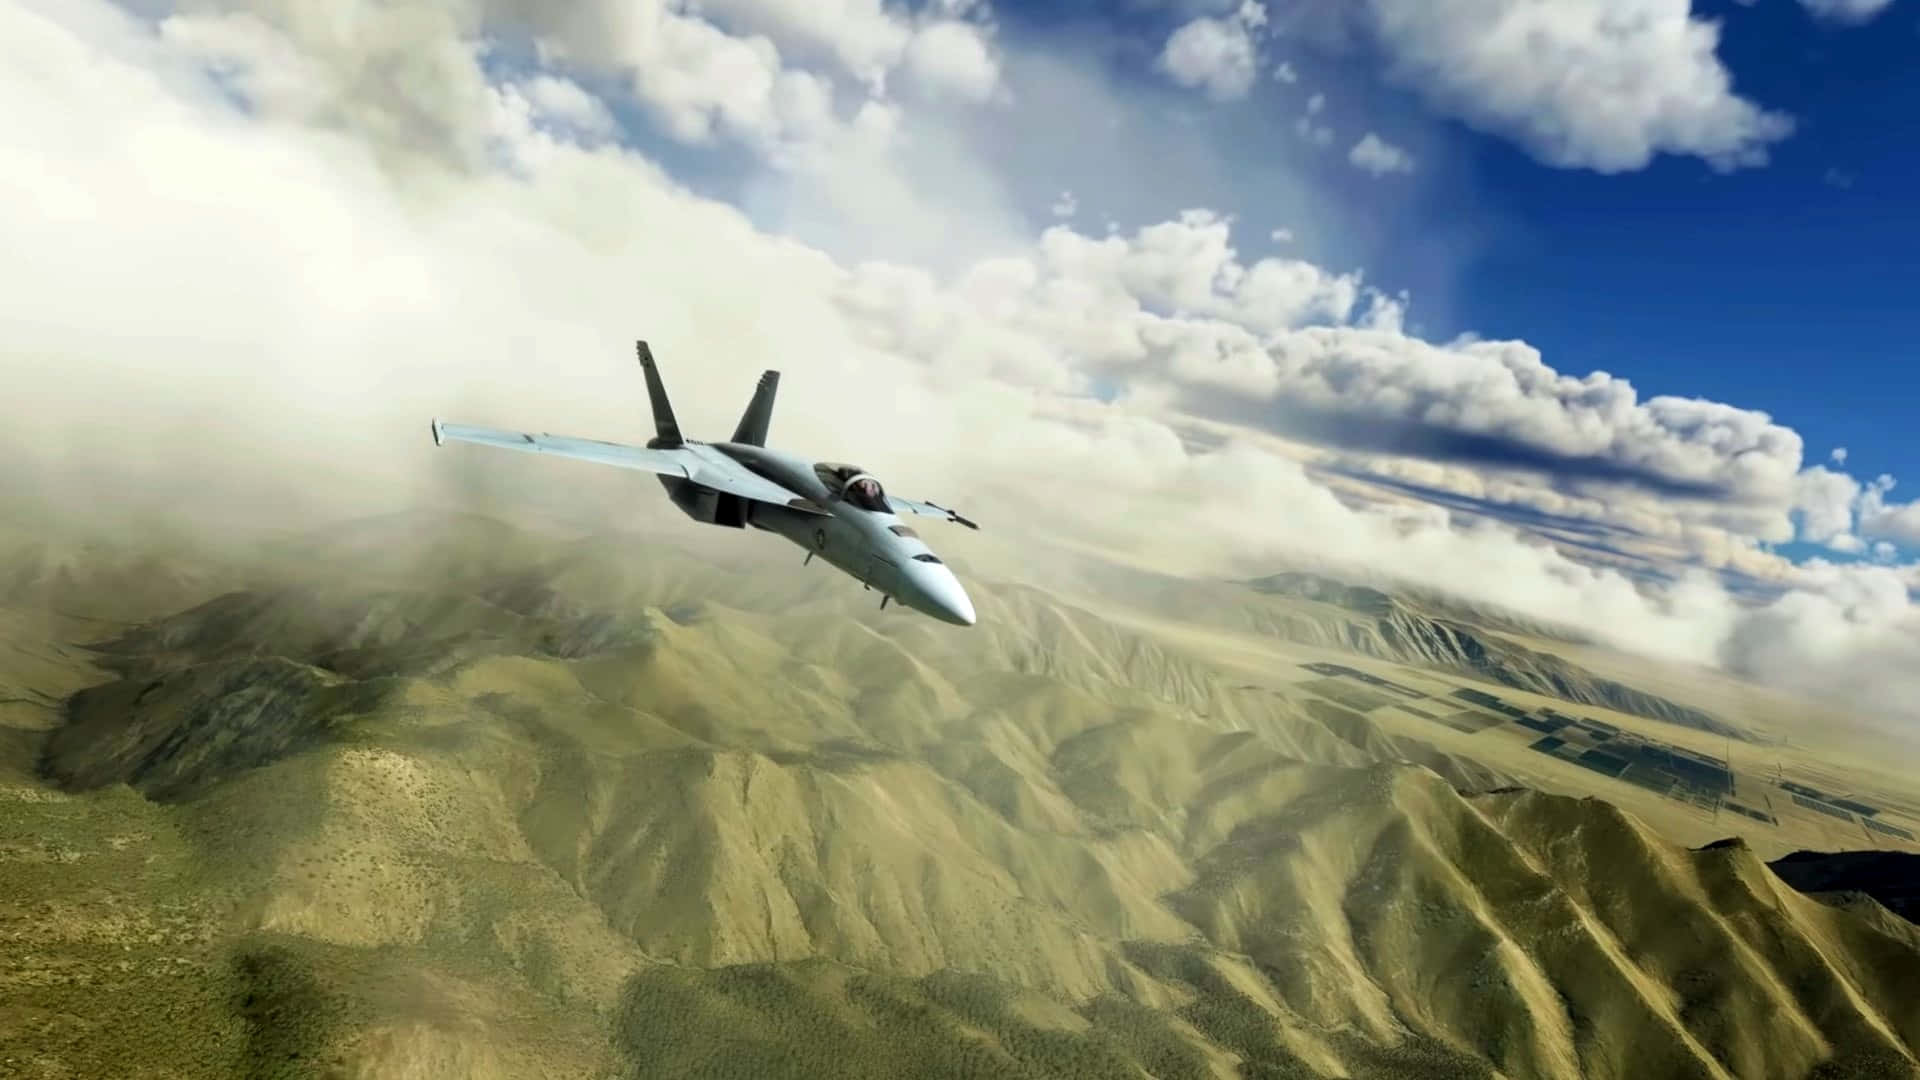 A Jet Fighter Flying Over A Mountain